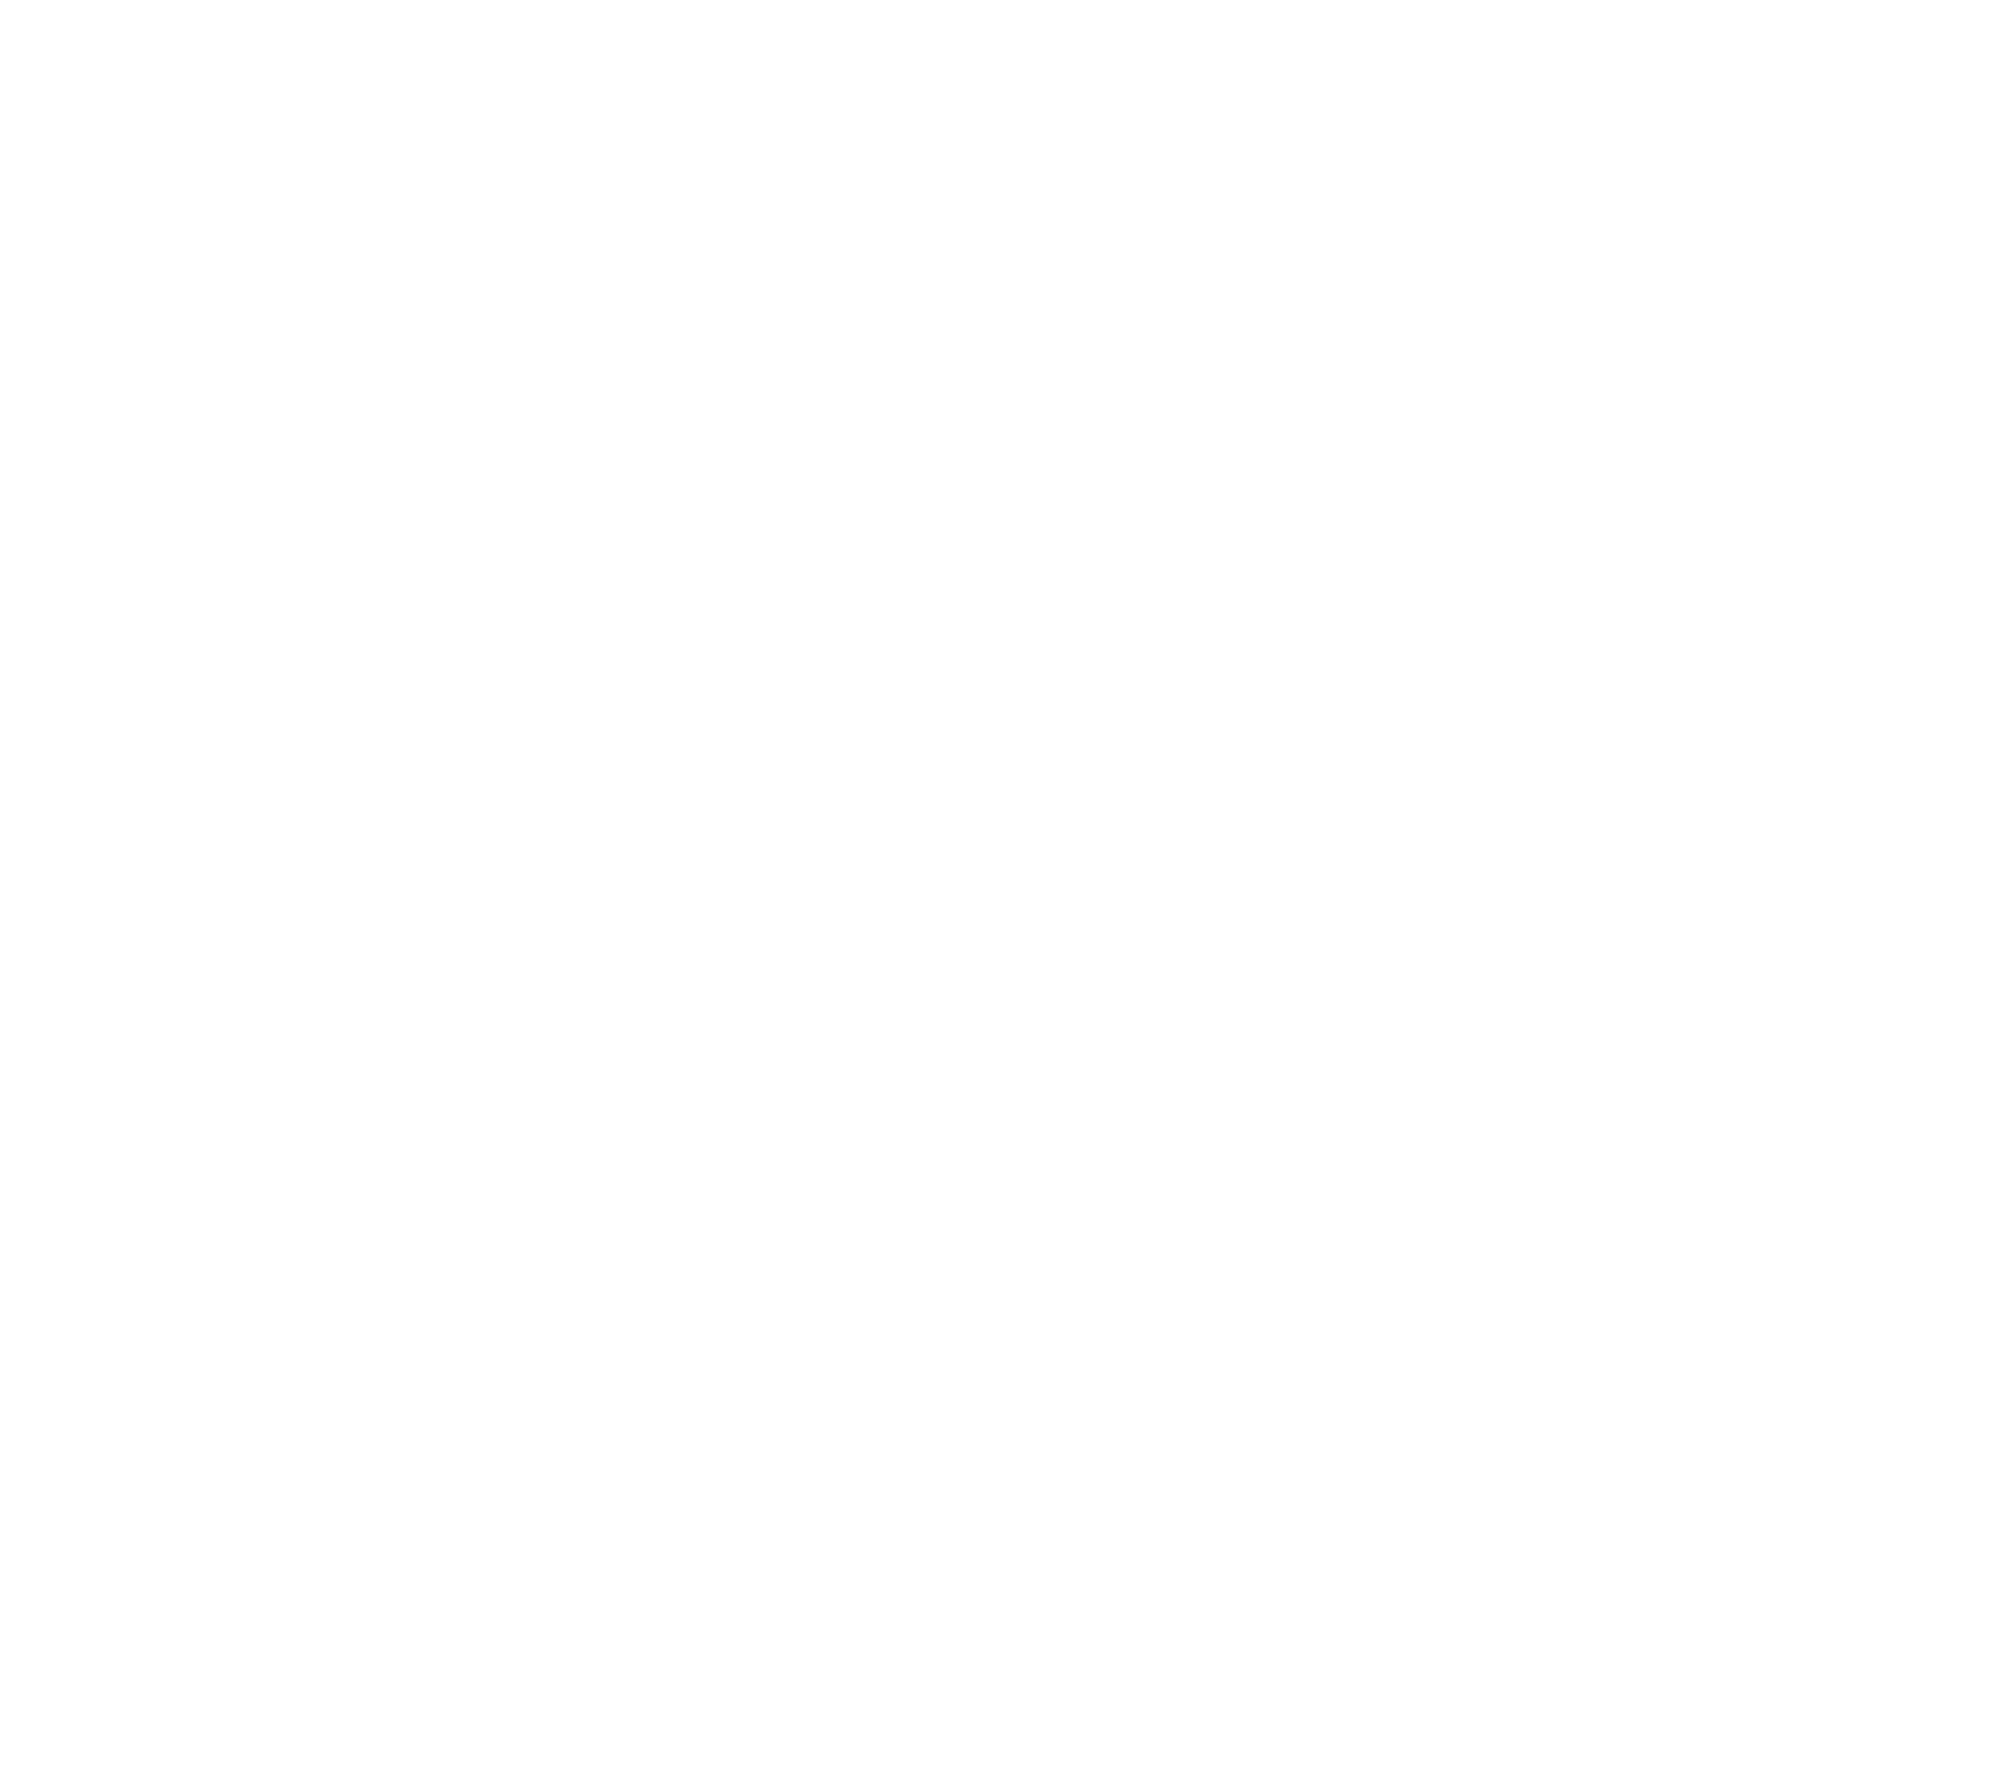 File Keep Calm And Carry On Crown Svg Wikimedia Commons - Keep Calm And Carry On Crown (2000x1776)